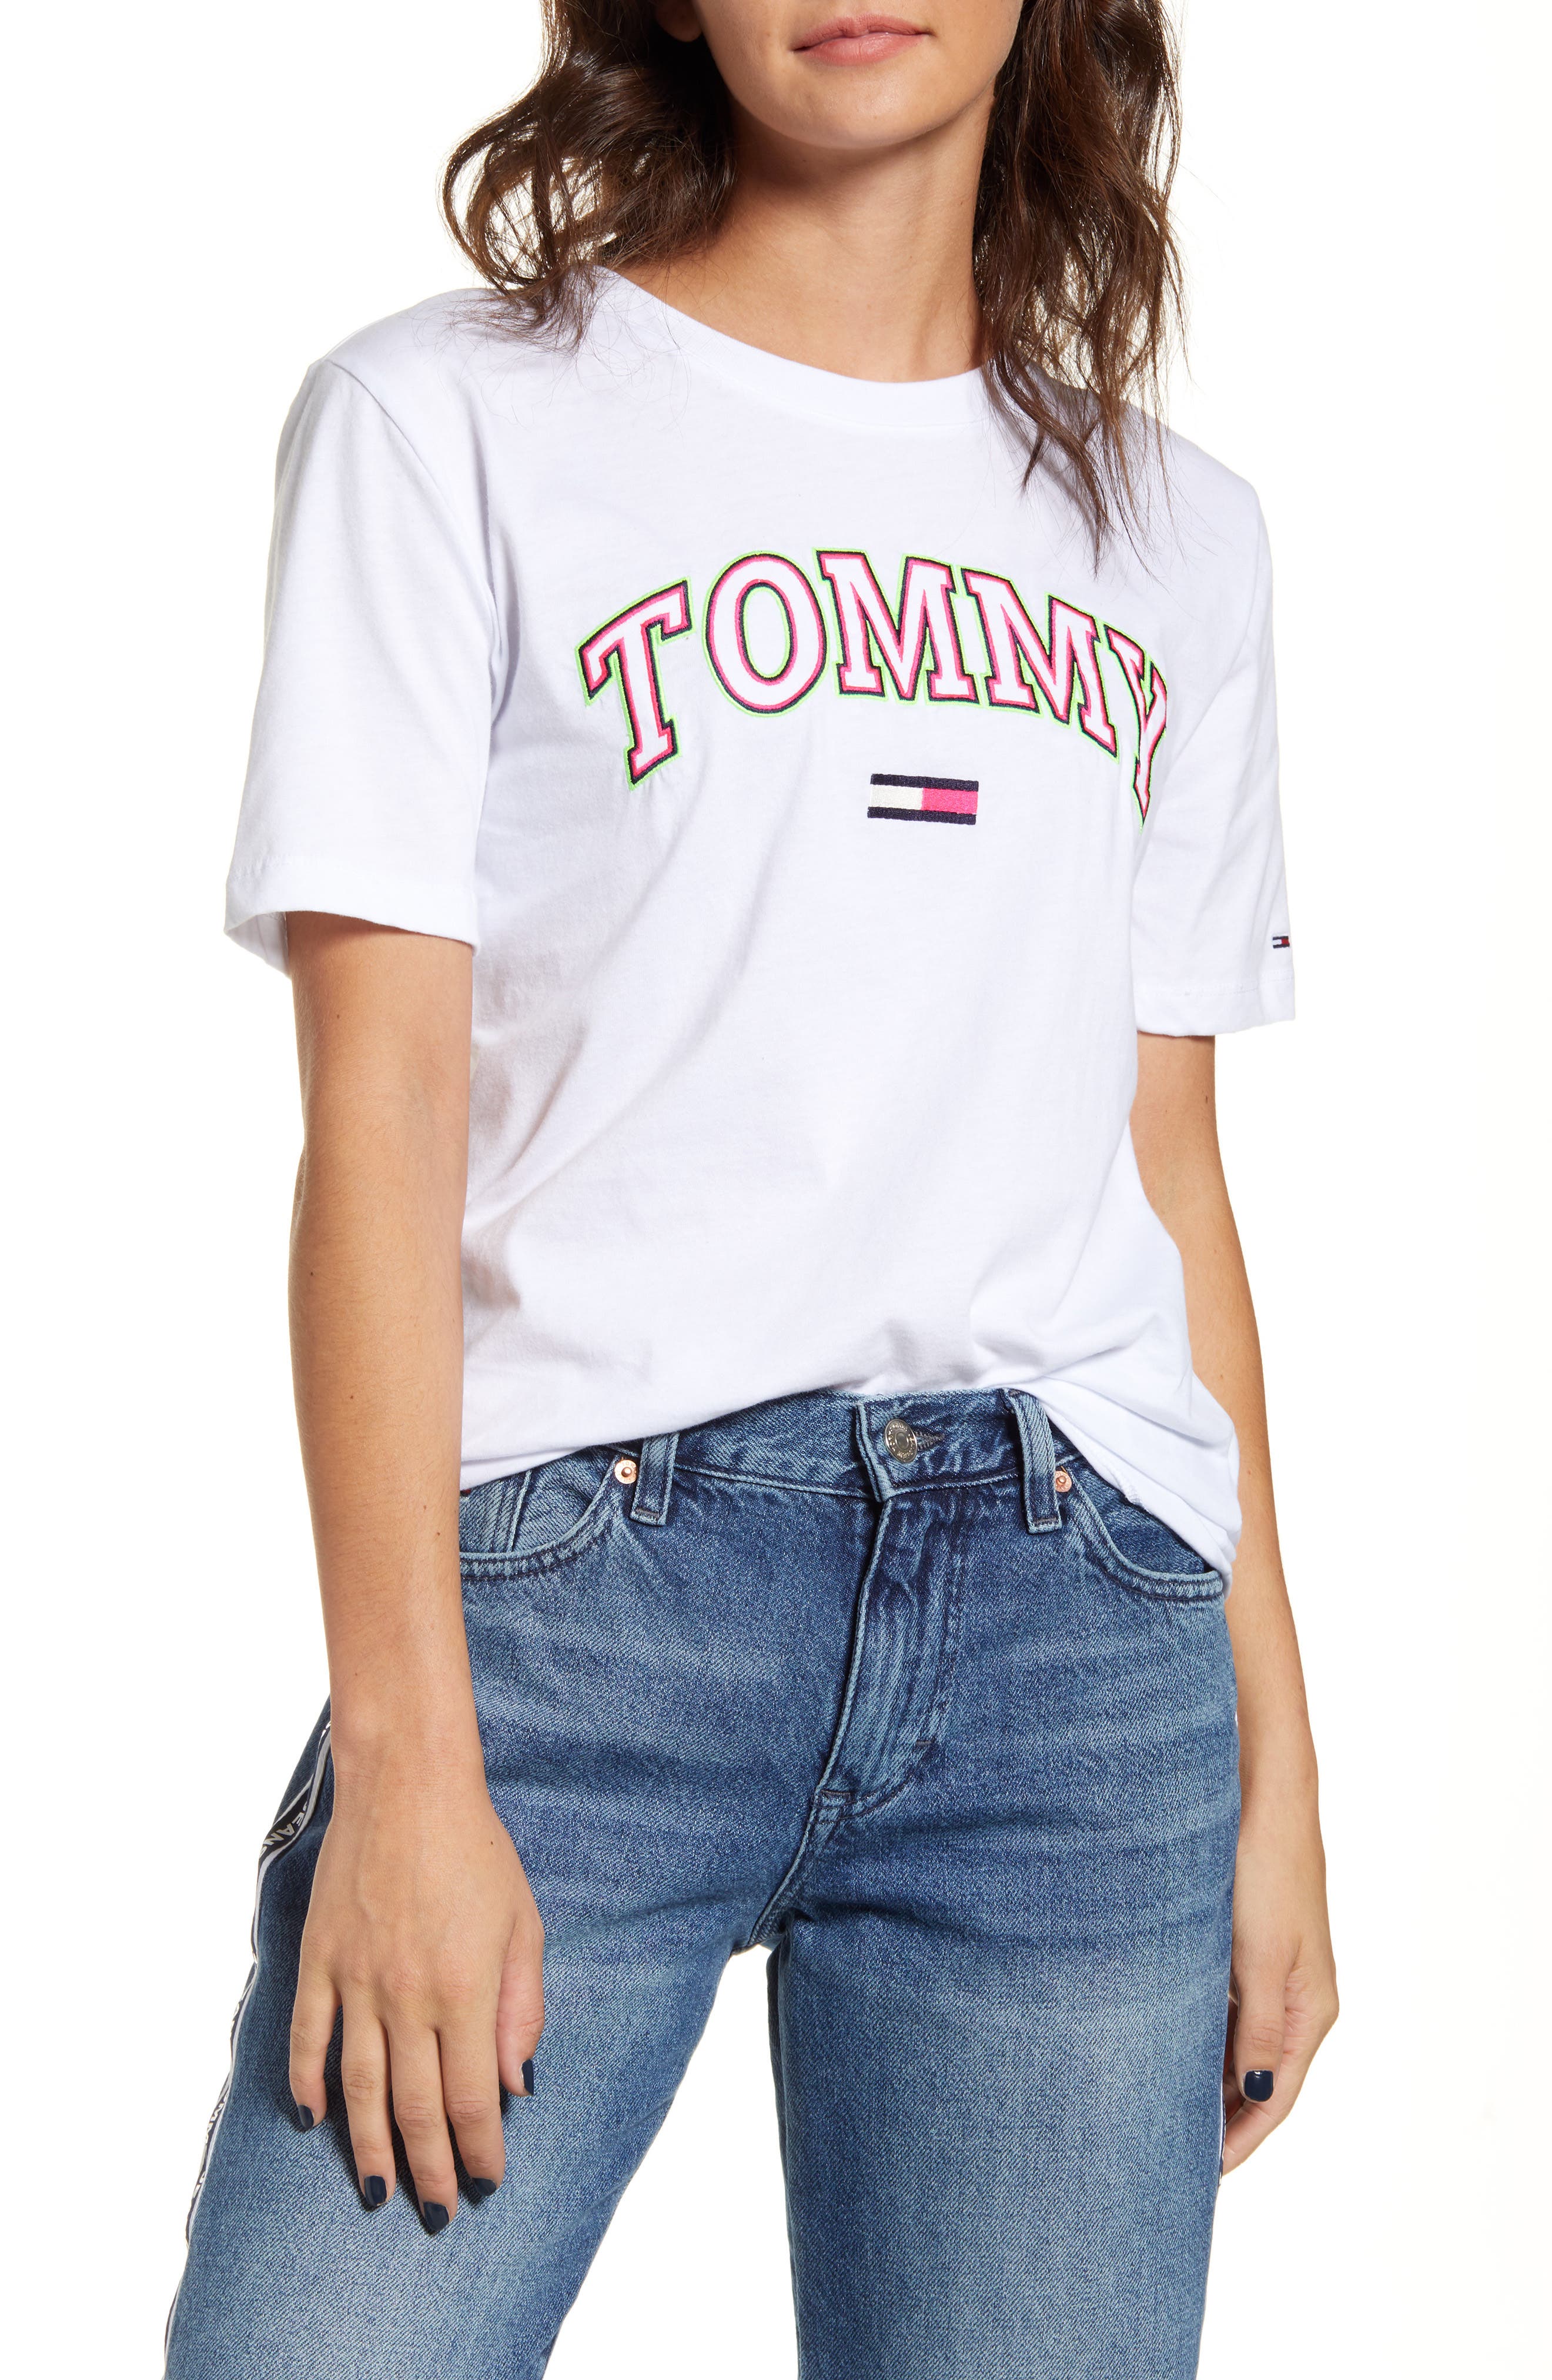 tommy jeans neon